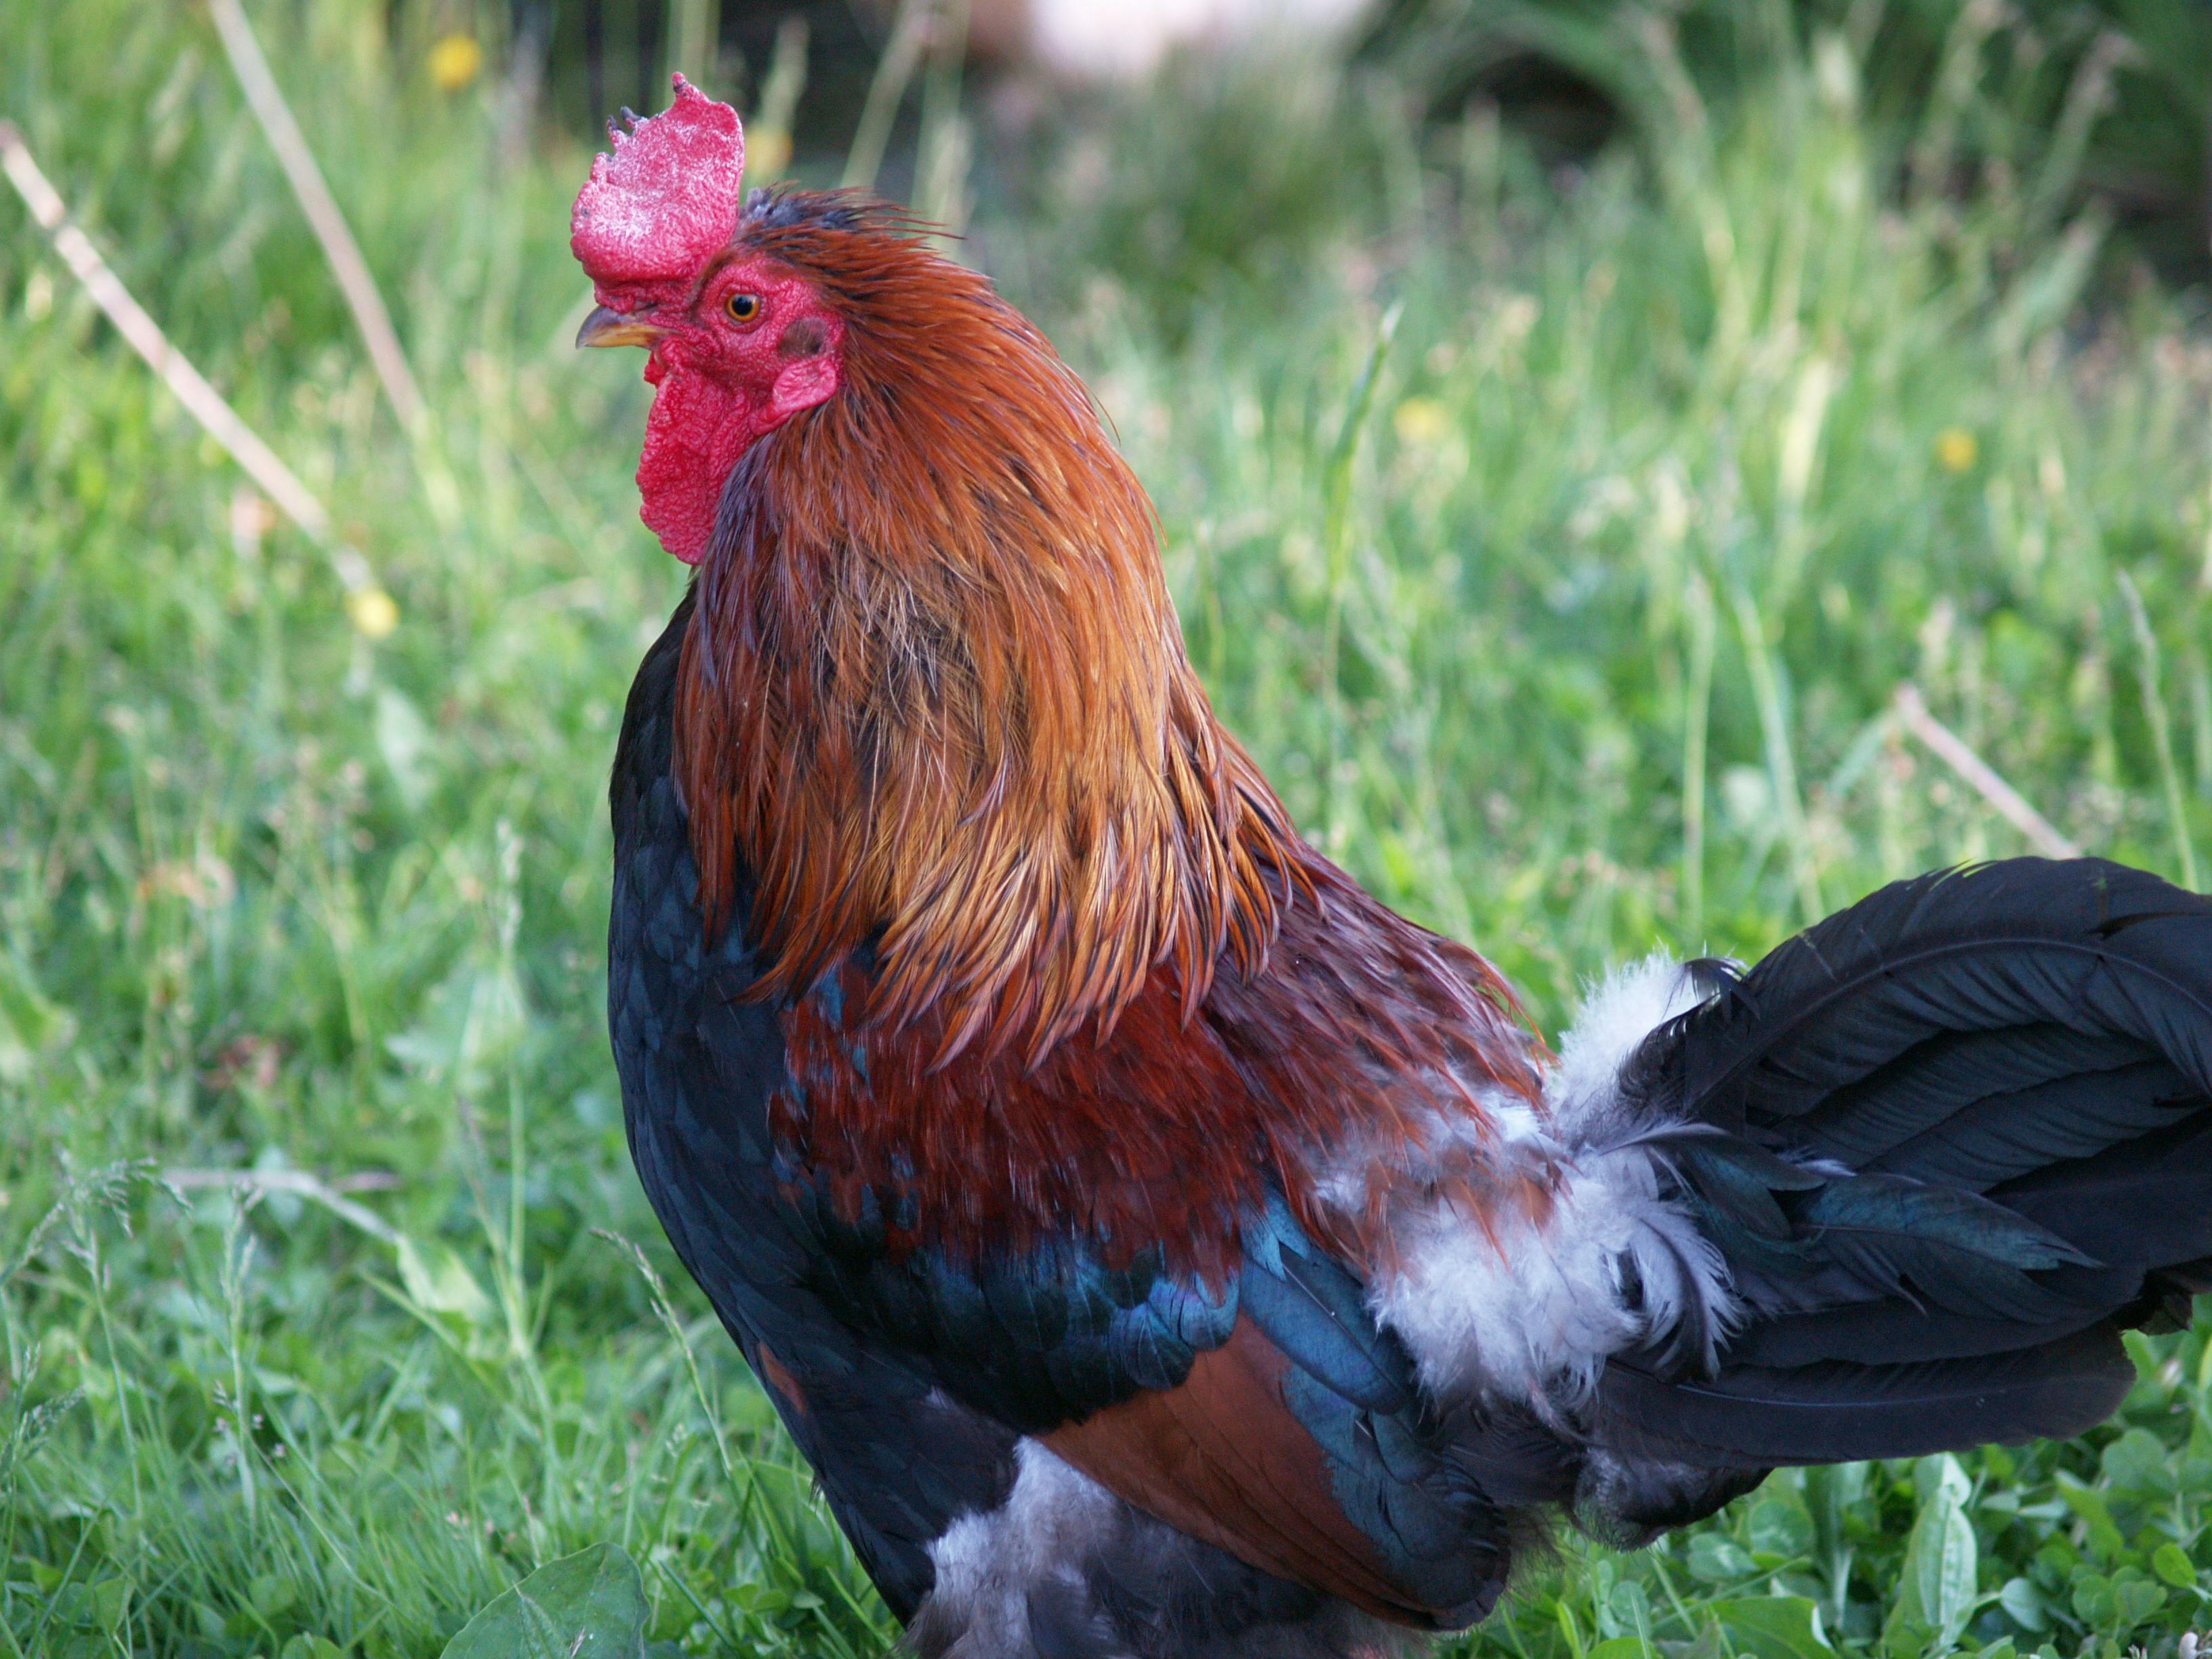 A Close-Up Shot of a Rooster · Free Stock Photo